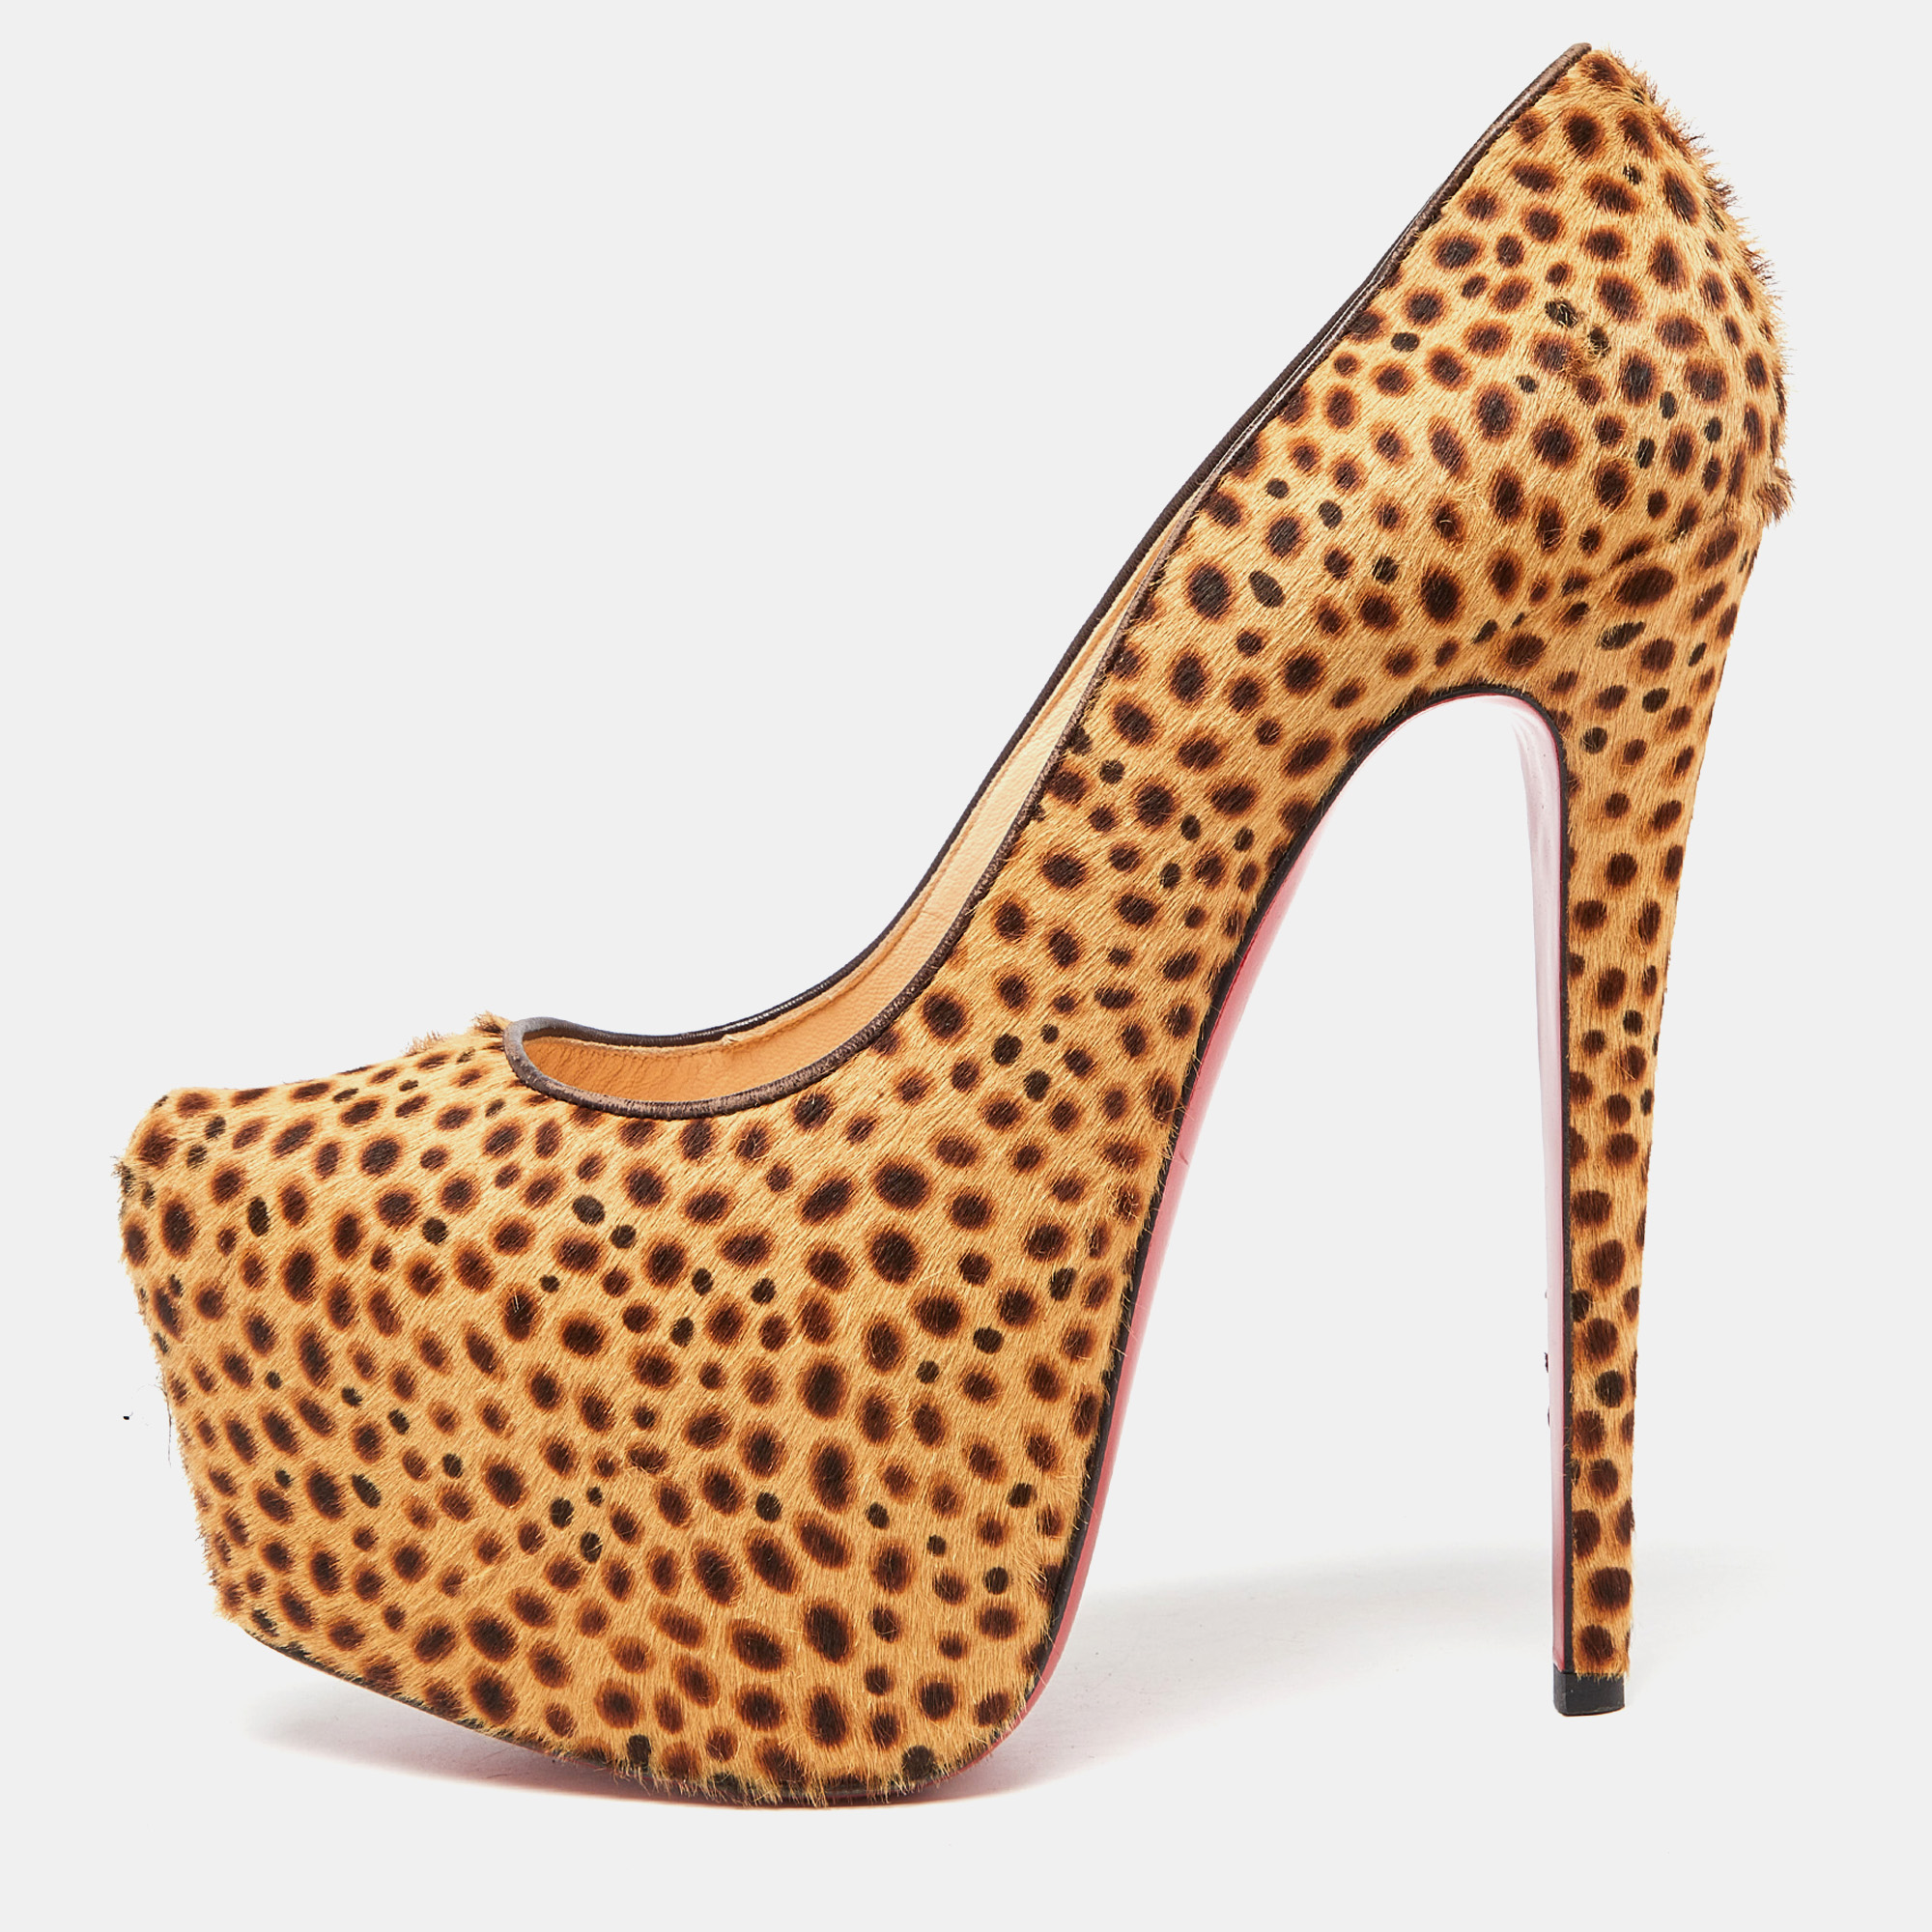 Take your love for Louboutins to new heights by adding this gorgeous pair to your collection. The pumps simply speak high fashion in every stitch and curve. The exteriors come made from leopard print calfhair and the pumps are finished with platforms 16.5cm heels and the famous red soles.